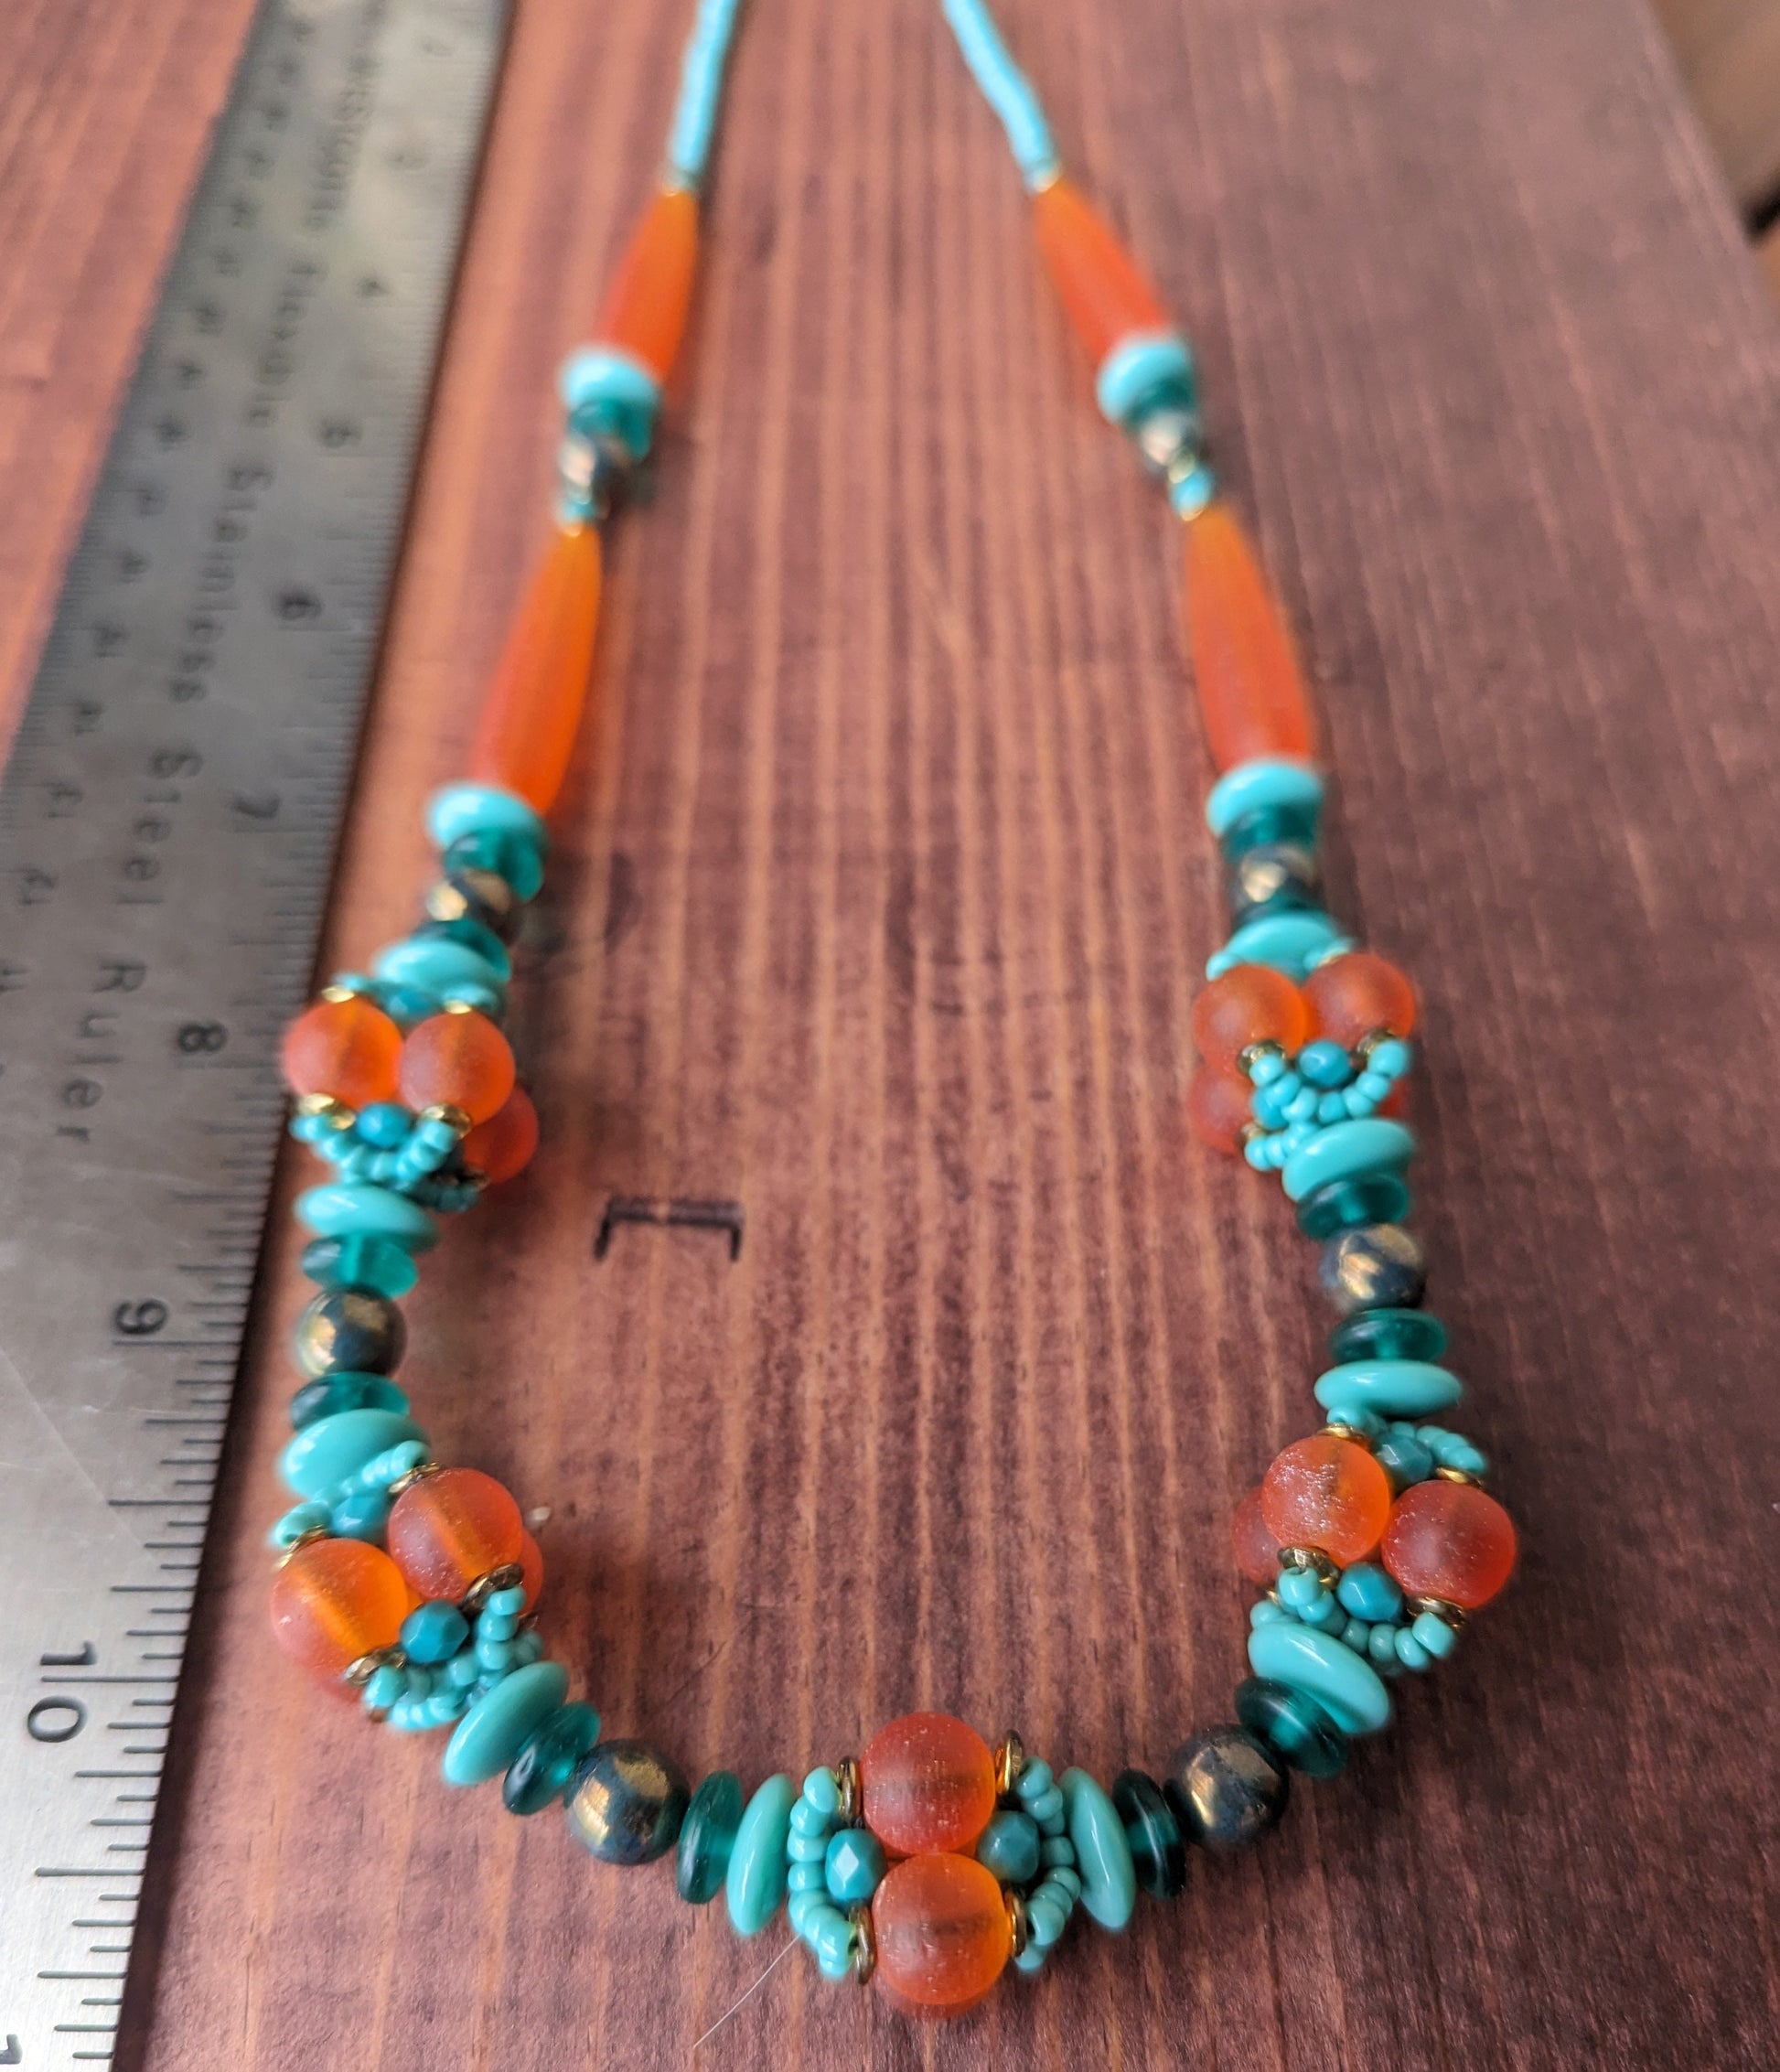 A statement necklace lays on a reddish wood board, next to a metal ruler. The necklace has frosted orange  beads alternating with dark to light shades of turquoise.  At the bottom of the necklace, there are five clusters of beads that have been woven into an orb. 